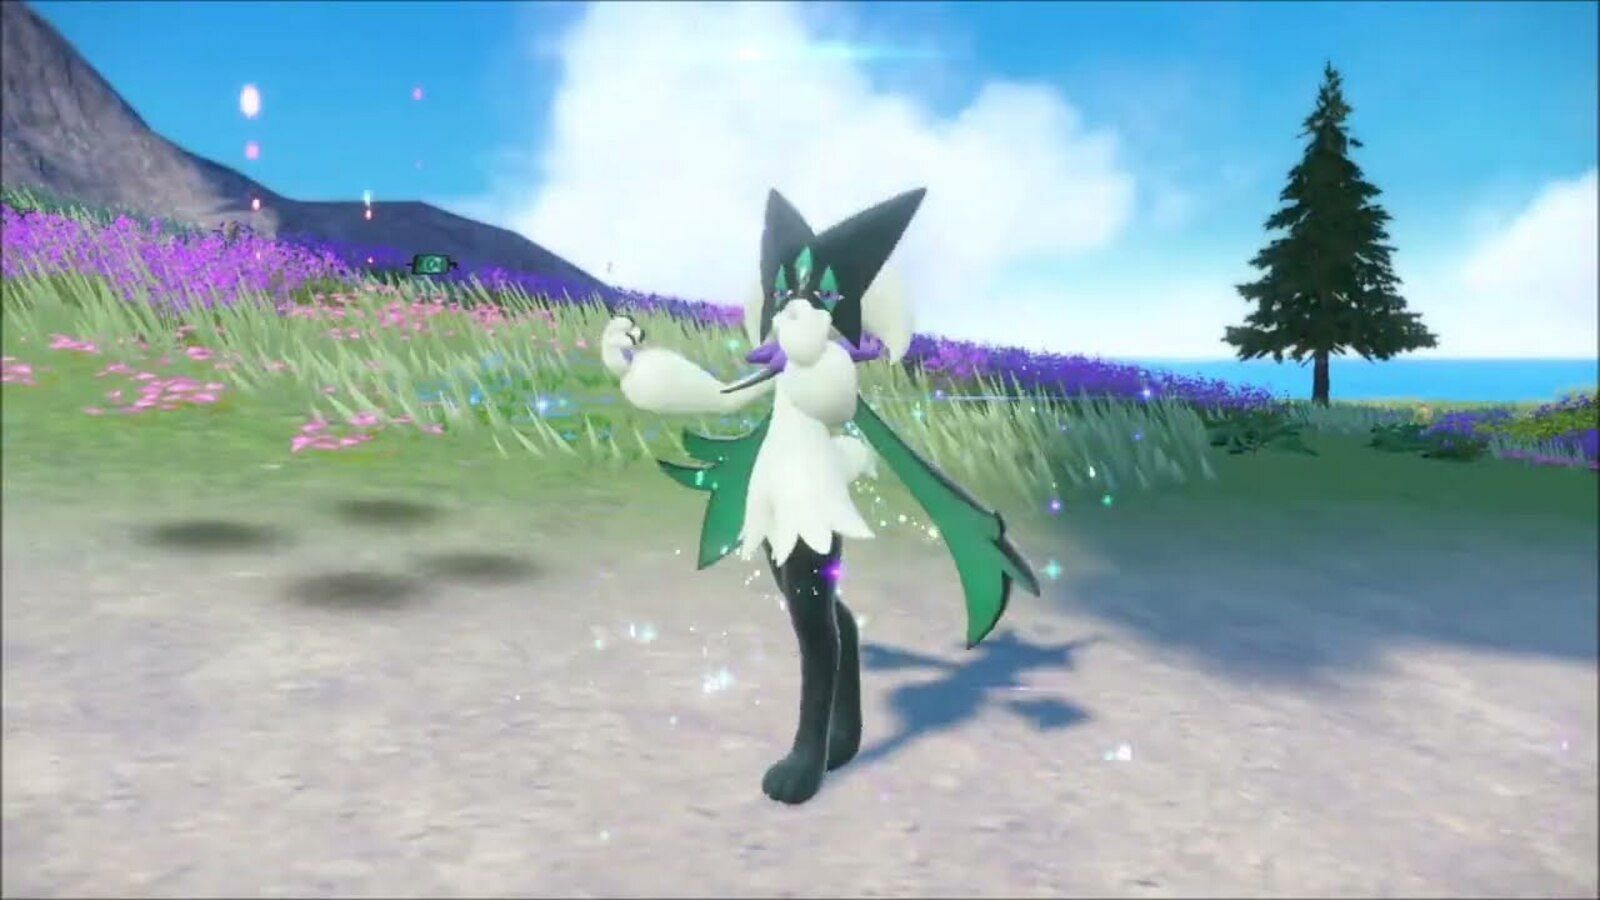 Shiny Meowscarad may be acquired using a Shiny Grass Sandwich in Pokemon Scarlet and Violet (Image via TPC)